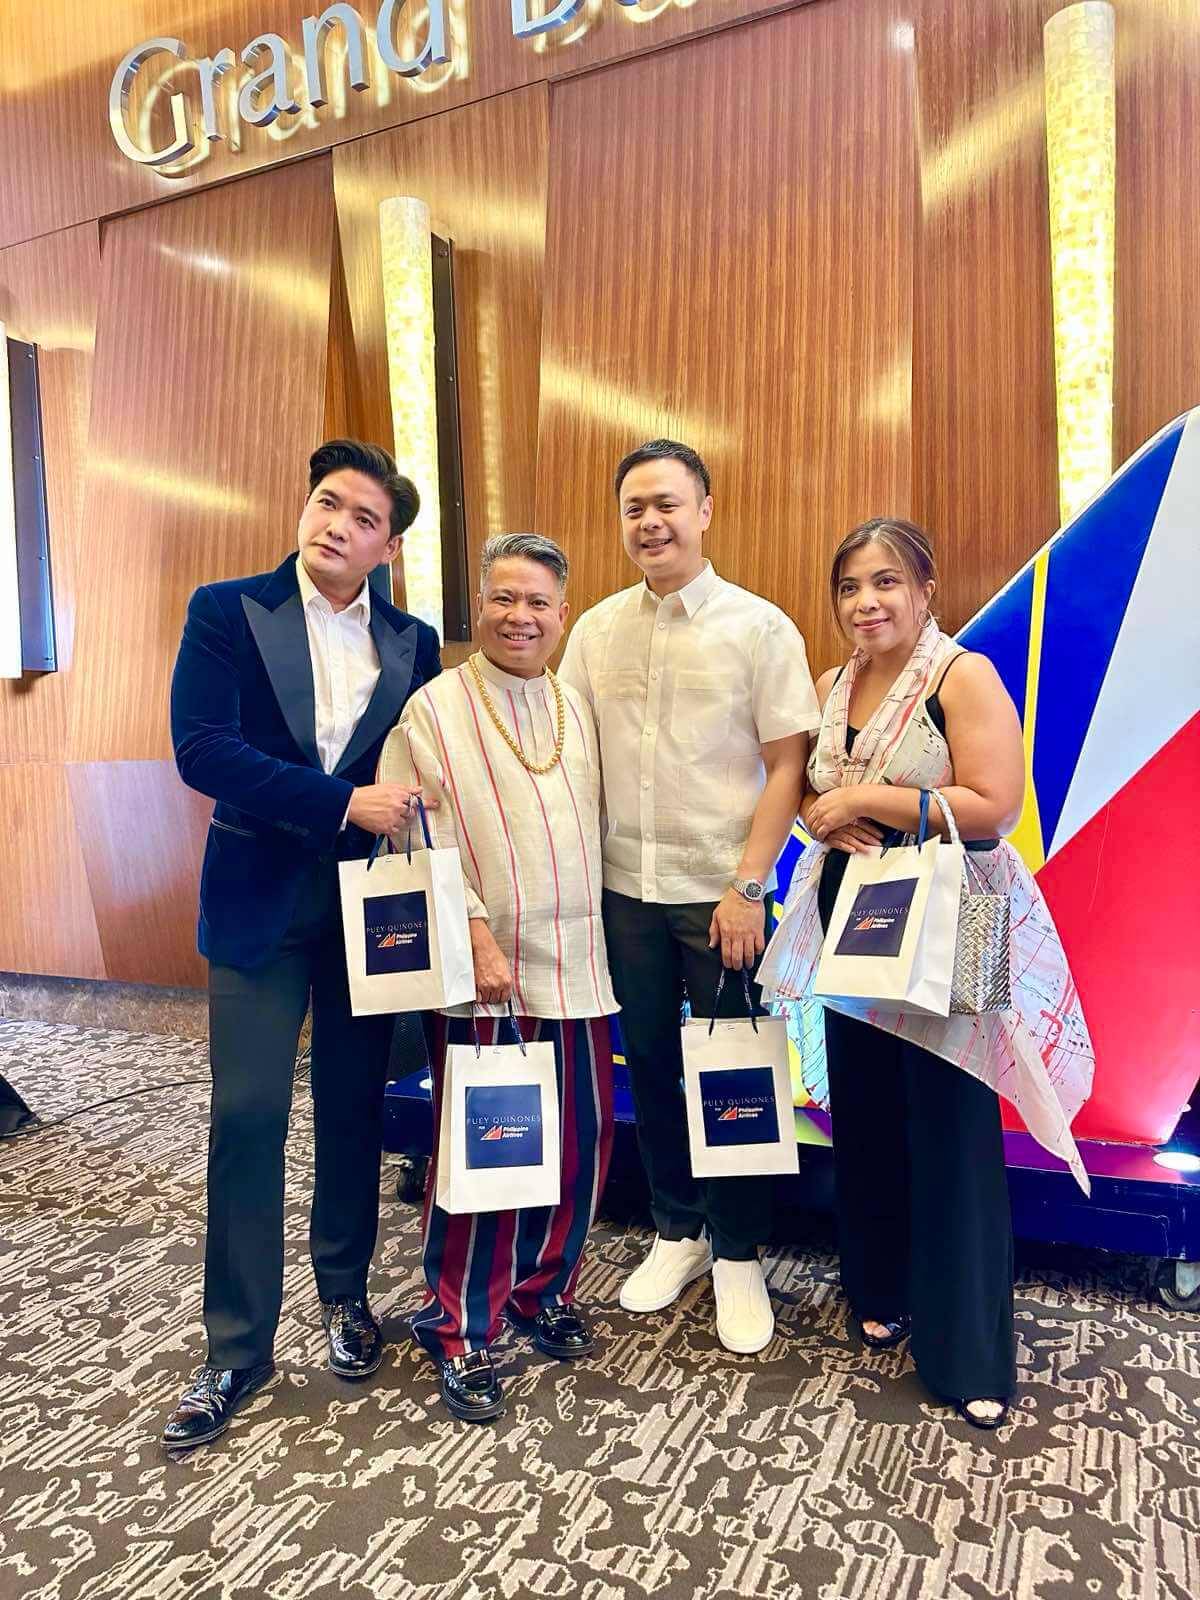 President of PAL, Captain Stanley Ng together with Tim Yap and Puey Quiñones, a fashion designer of international renown.